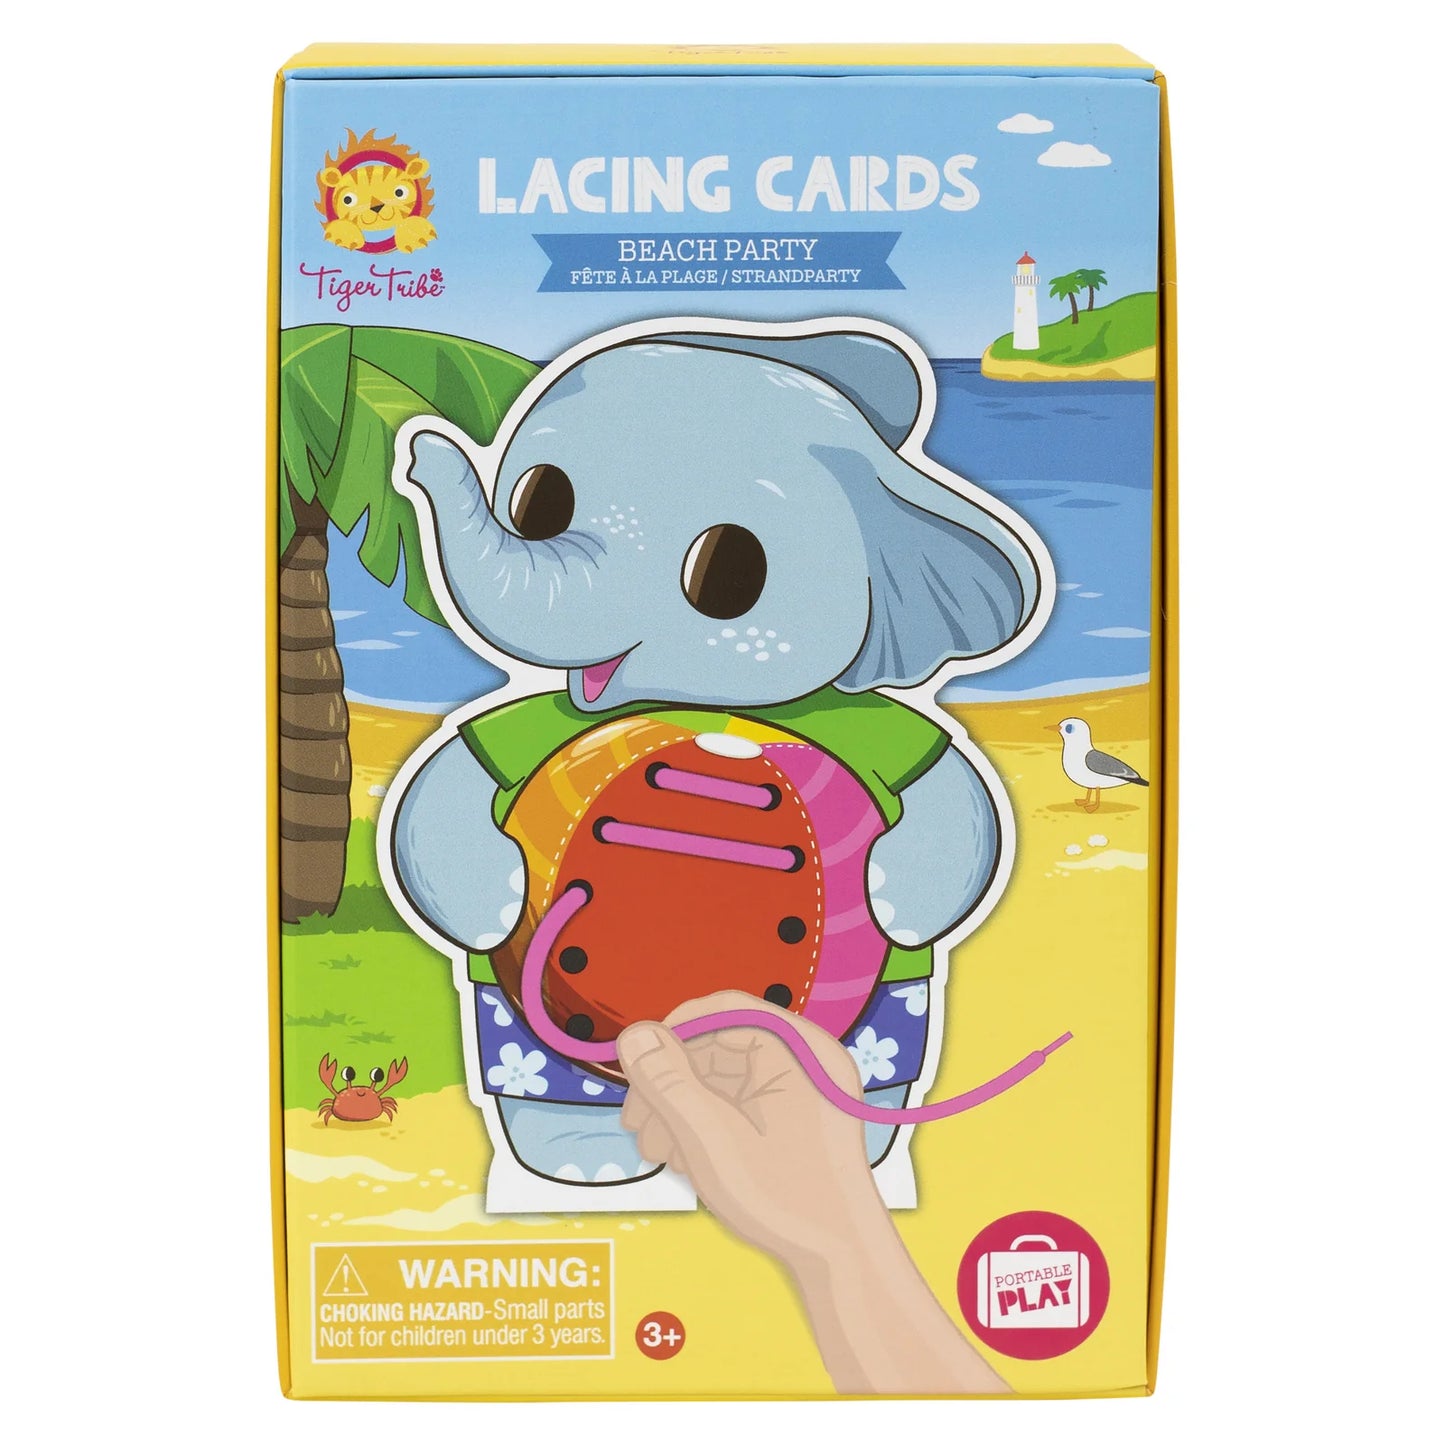 Lacing Cards Beach Party